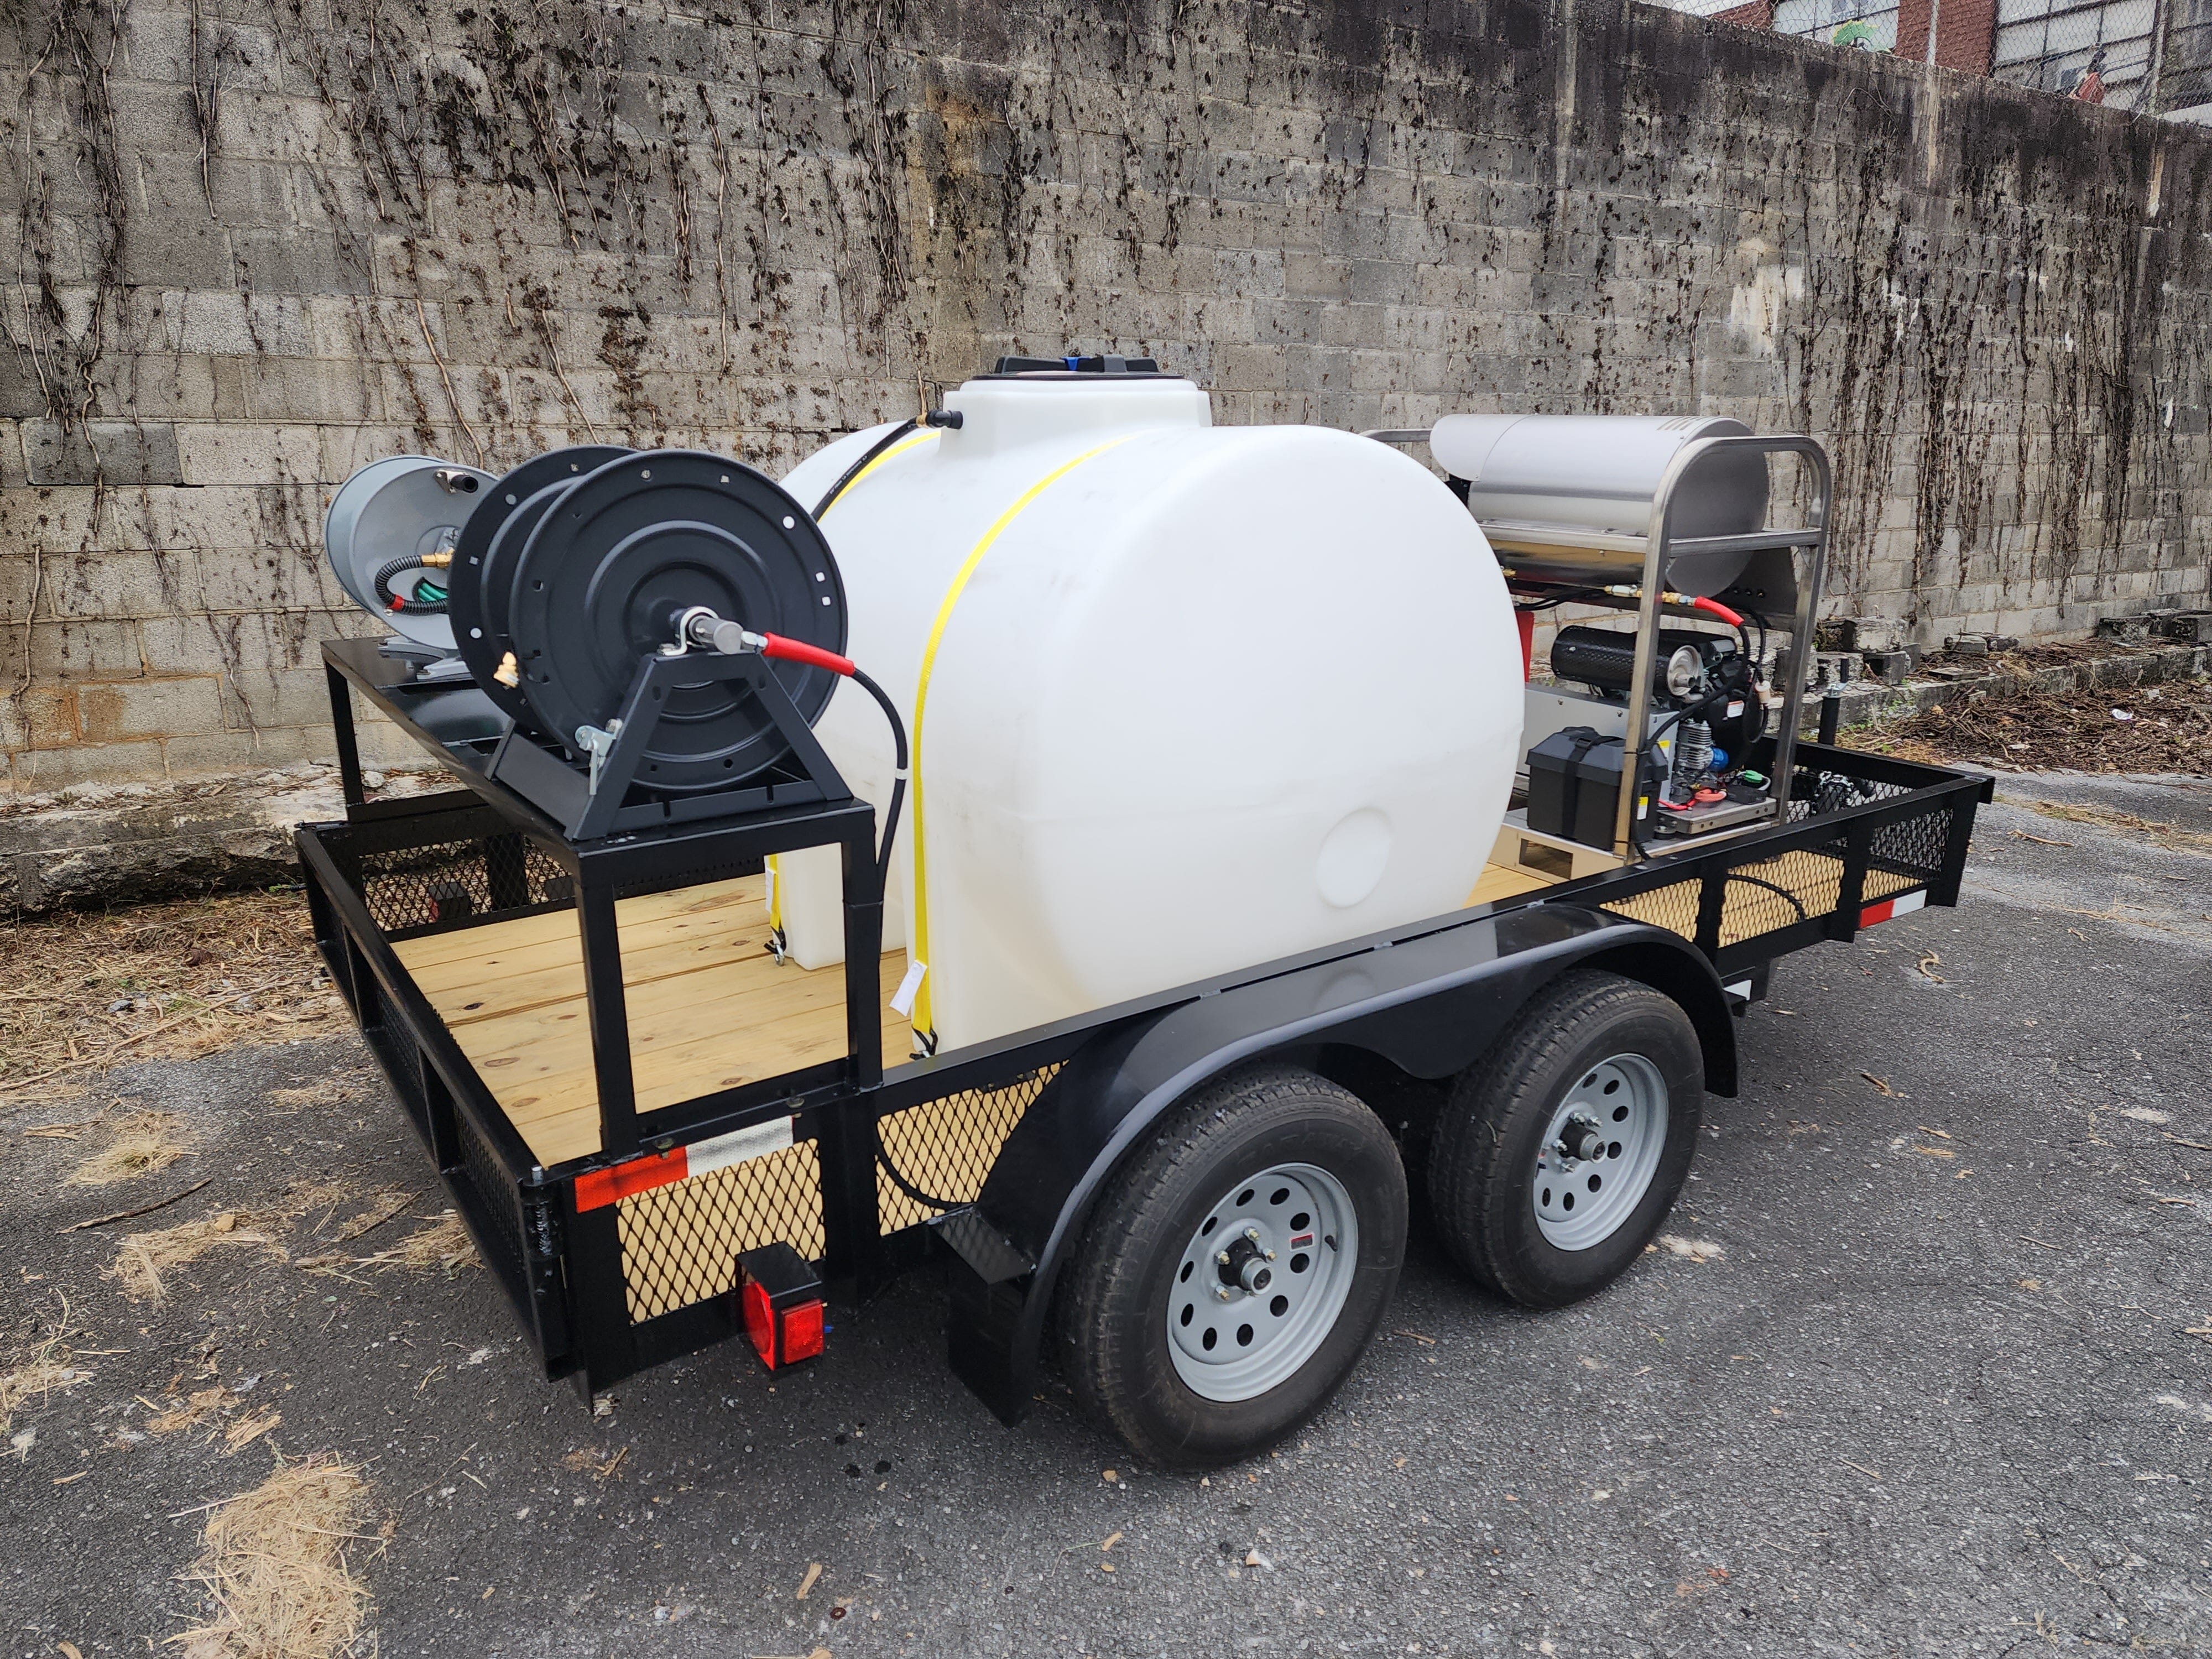 Hydro Max 8gpm at 4000psi Hot Water Trailer Package-SS Unit Pressure Washer Trailer Package BCE Cleaning Systems 